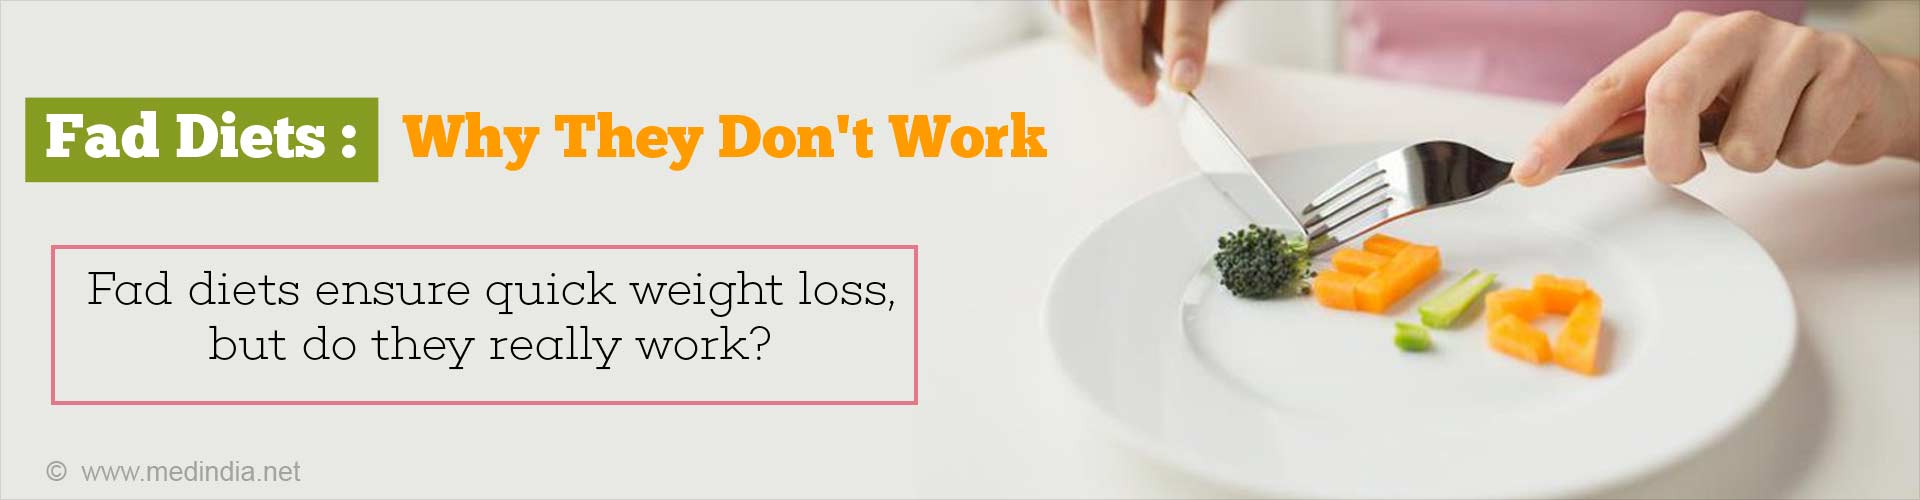 Fad Diets: Why they don't work
Fad diets ensure quick weight loss, but do they really work?
